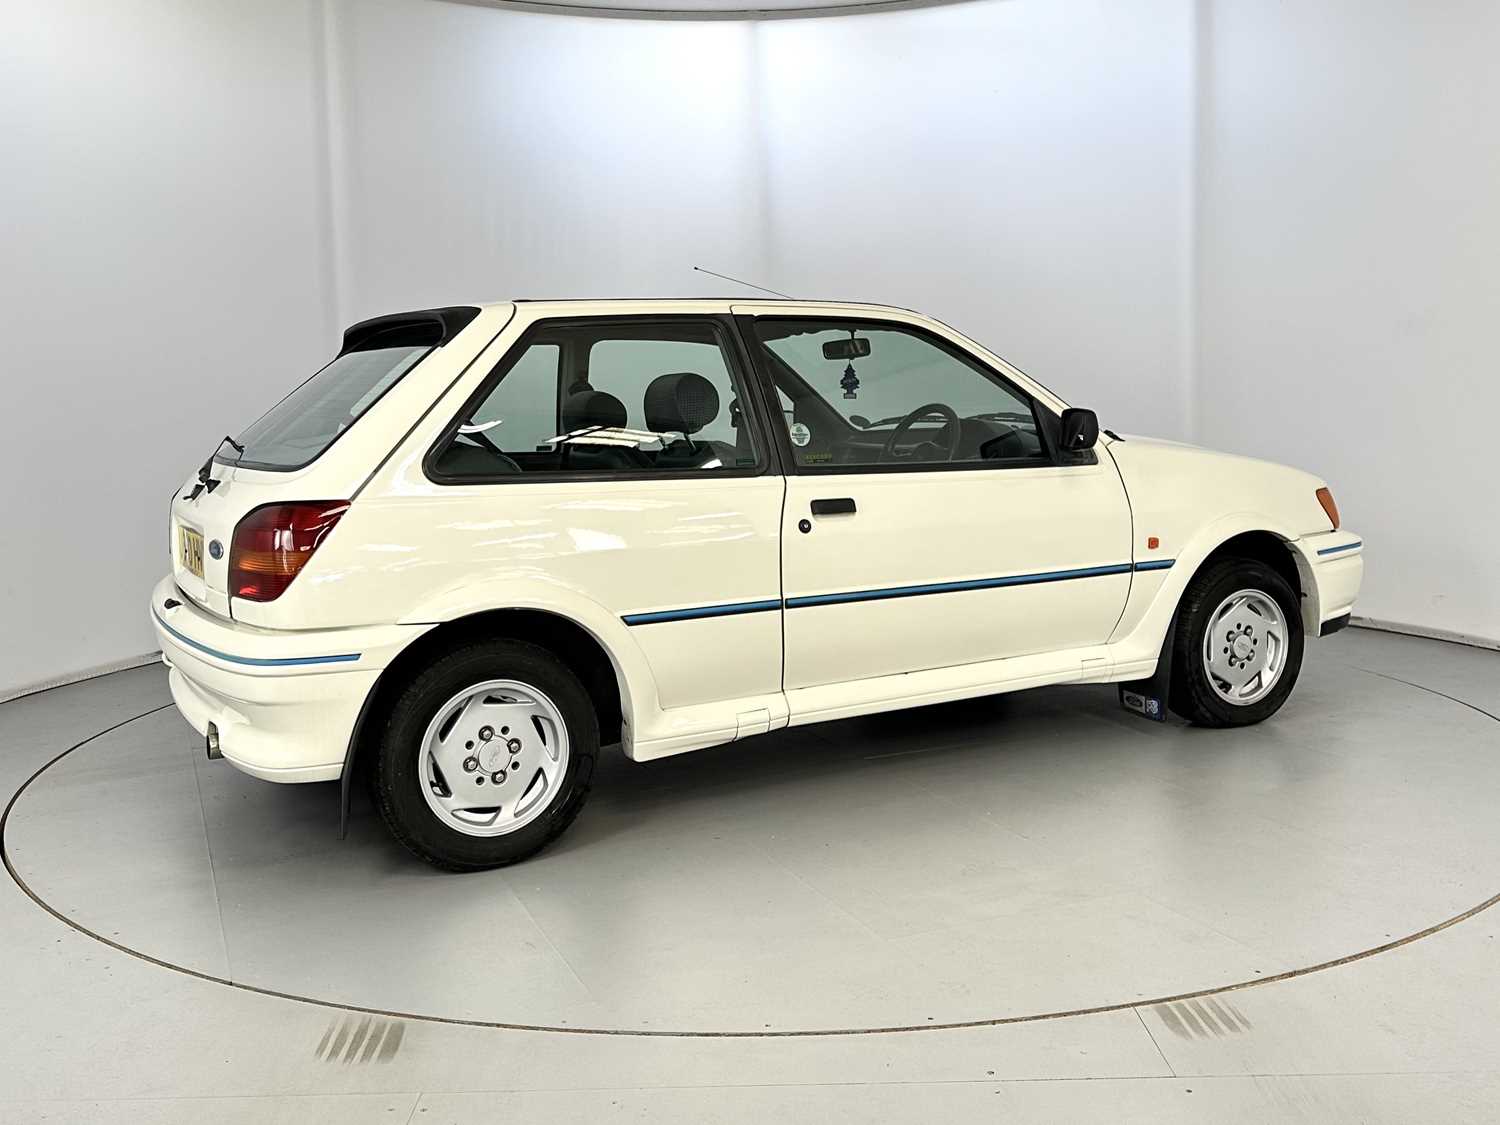 1991 Ford Fiesta XR2i - Image 10 of 30